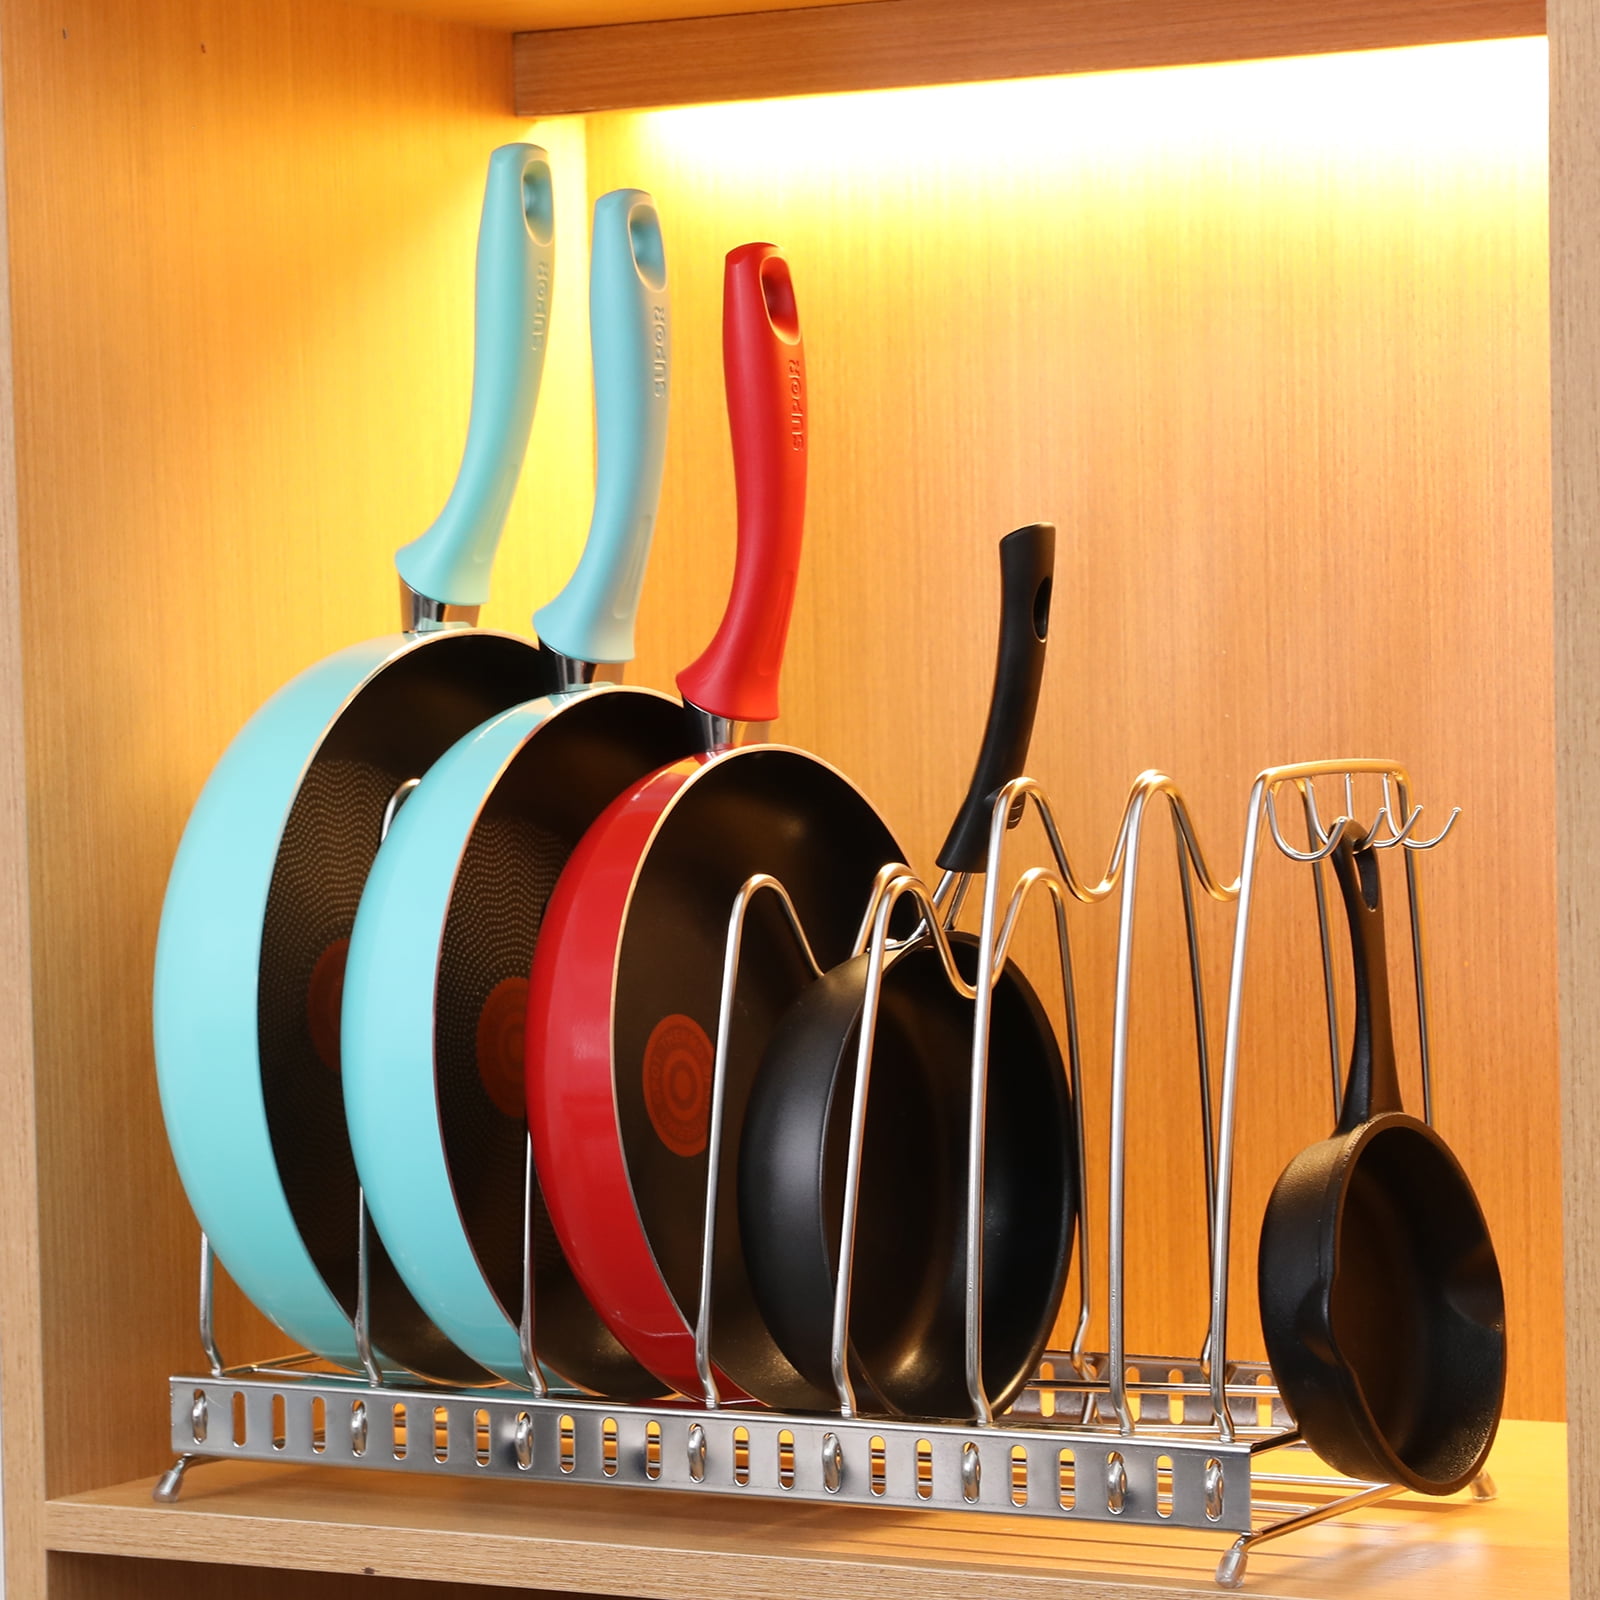 20 Best Pot And Pan Organizers For A Tidier Kitchen